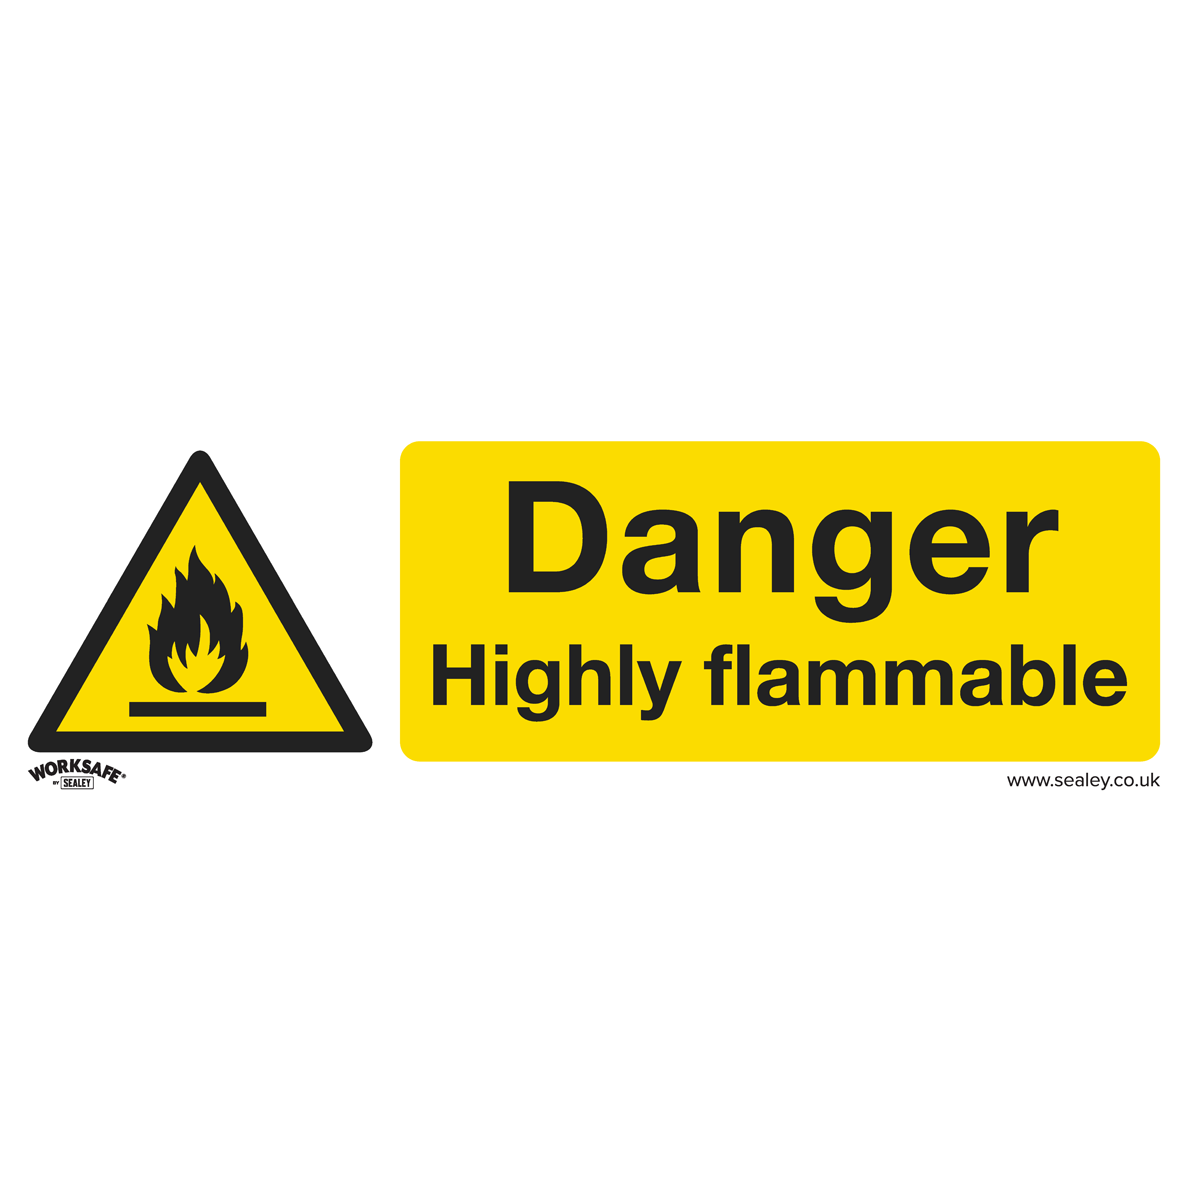 Warning Safety Sign - Danger Highly Flammable - Self-Adhesive Vinyl